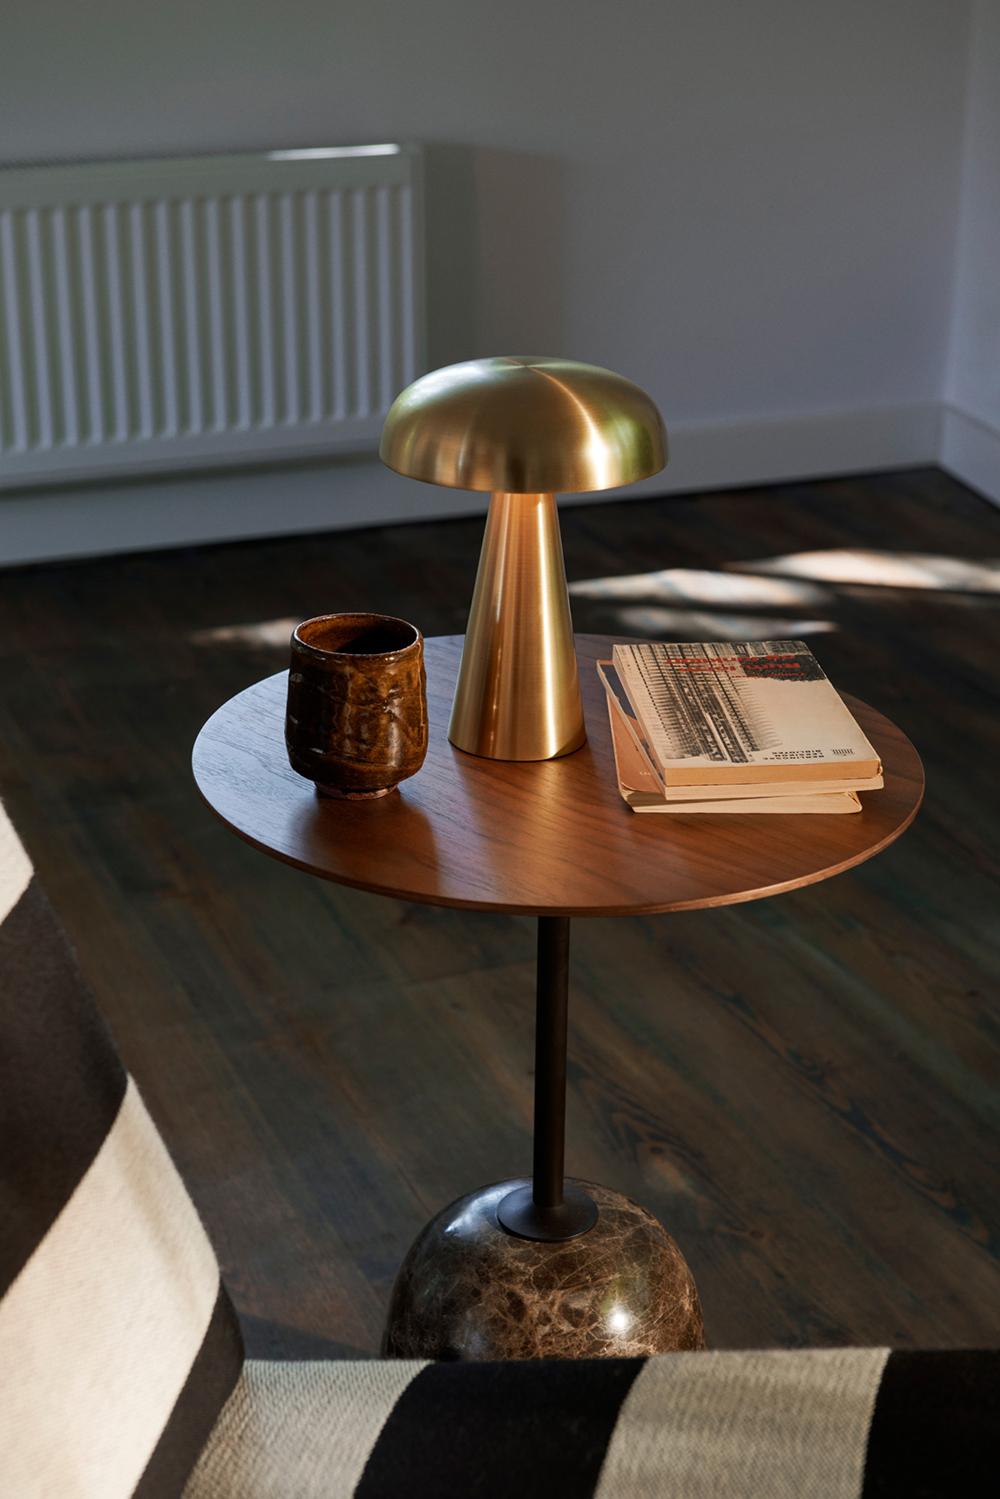 Como SC53, a portable Brass table lamp from Space Copenhagen. 
Crafted from anodized aluminium, Como’s sturdy base tapers up towards a softy curved, mushroom-shaped shade. 
This battery-powered lamp can operate for eleven hours at the highest